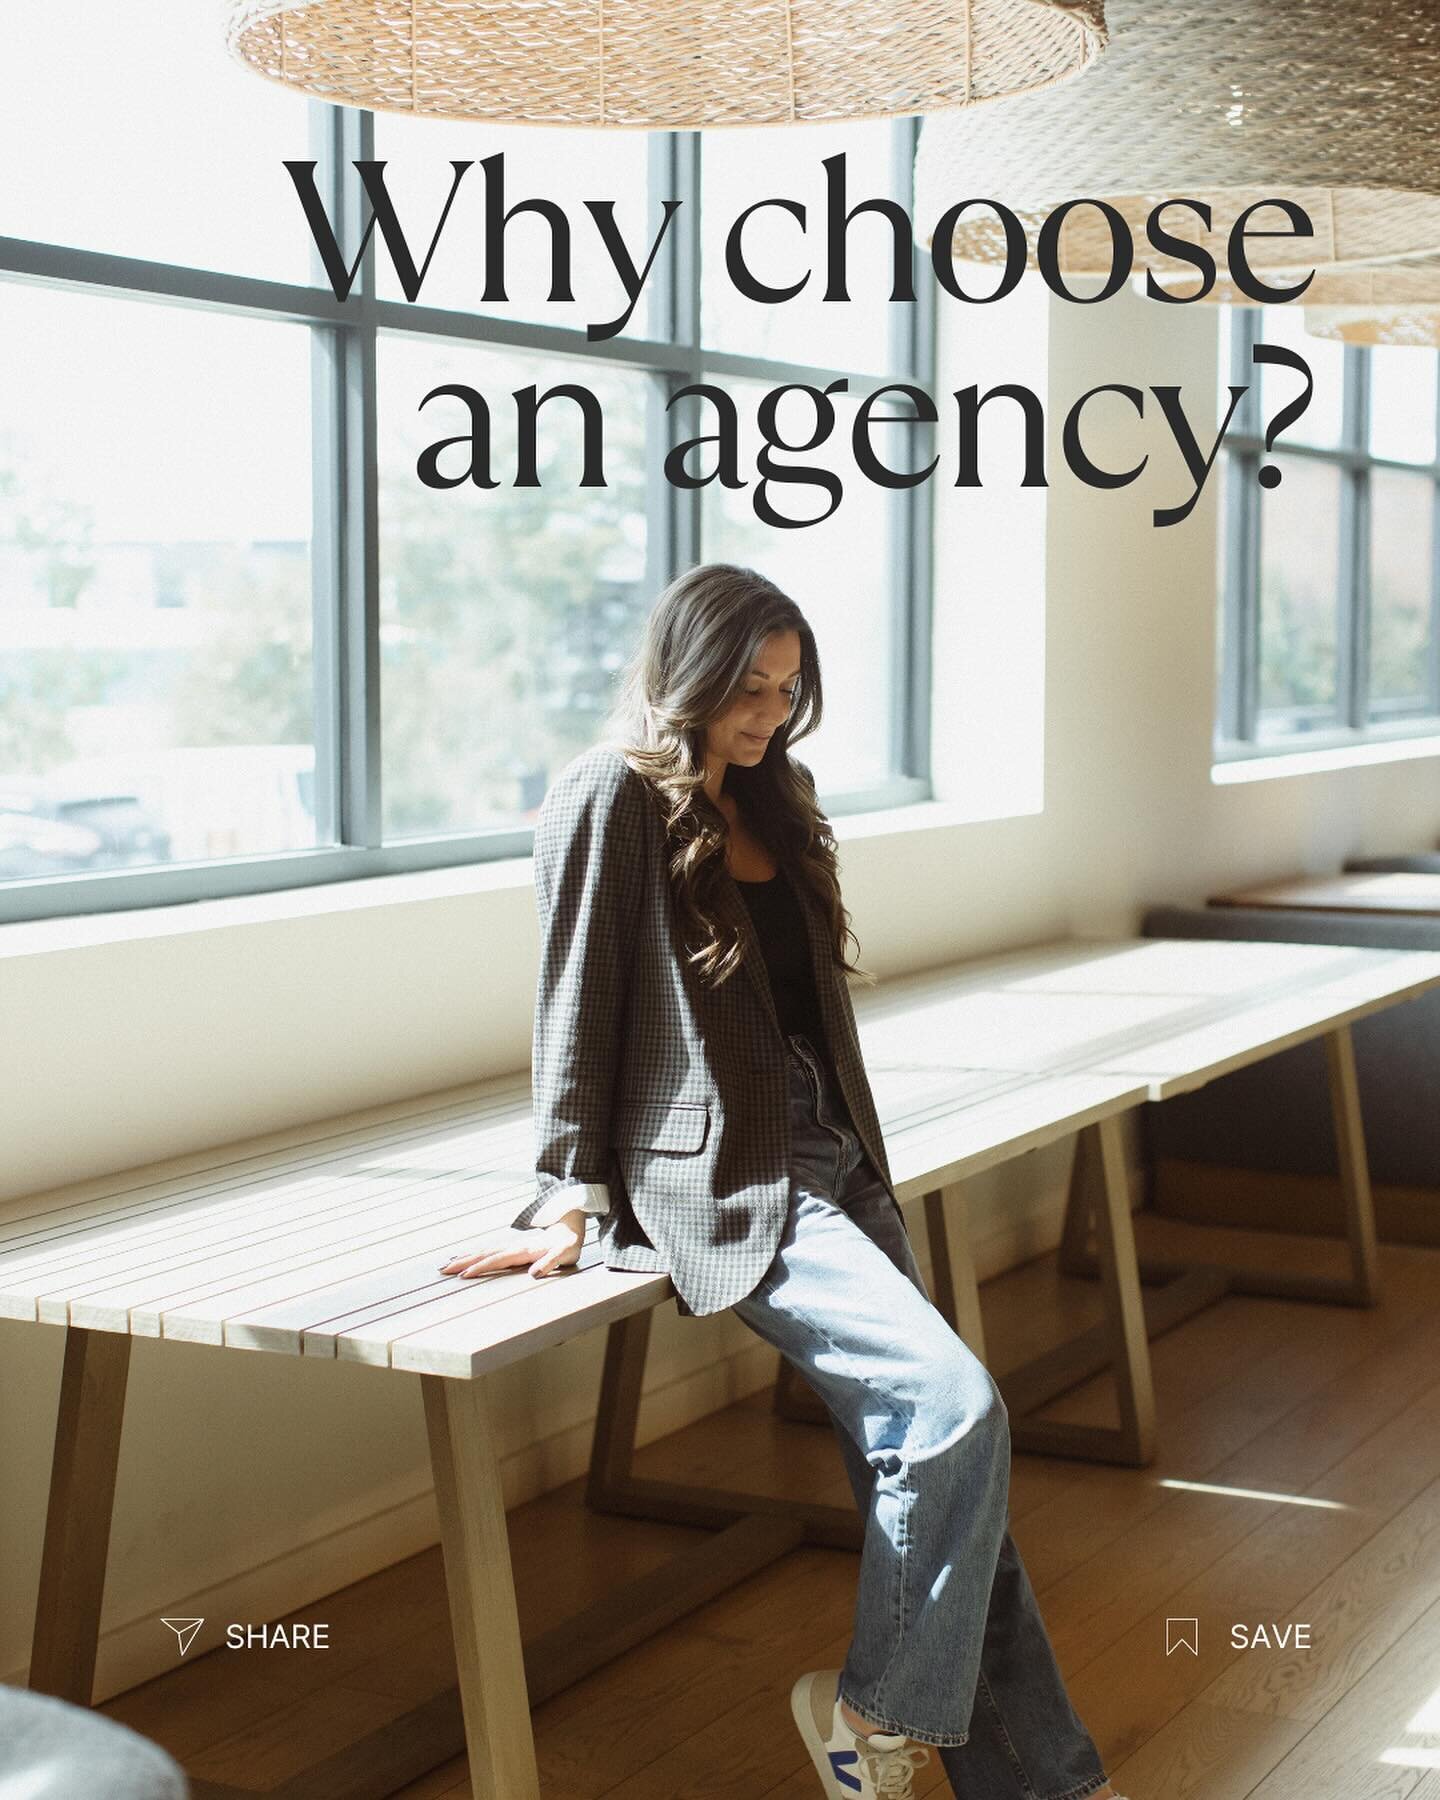 Considering an agency for your social media needs? ⬆️ We&rsquo;re hitting the reasons why you should consider an agency over an in-house team or freelancer when it comes to your marketing needs. 

Comment &ldquo;agency&rdquo; to learn more 🤍